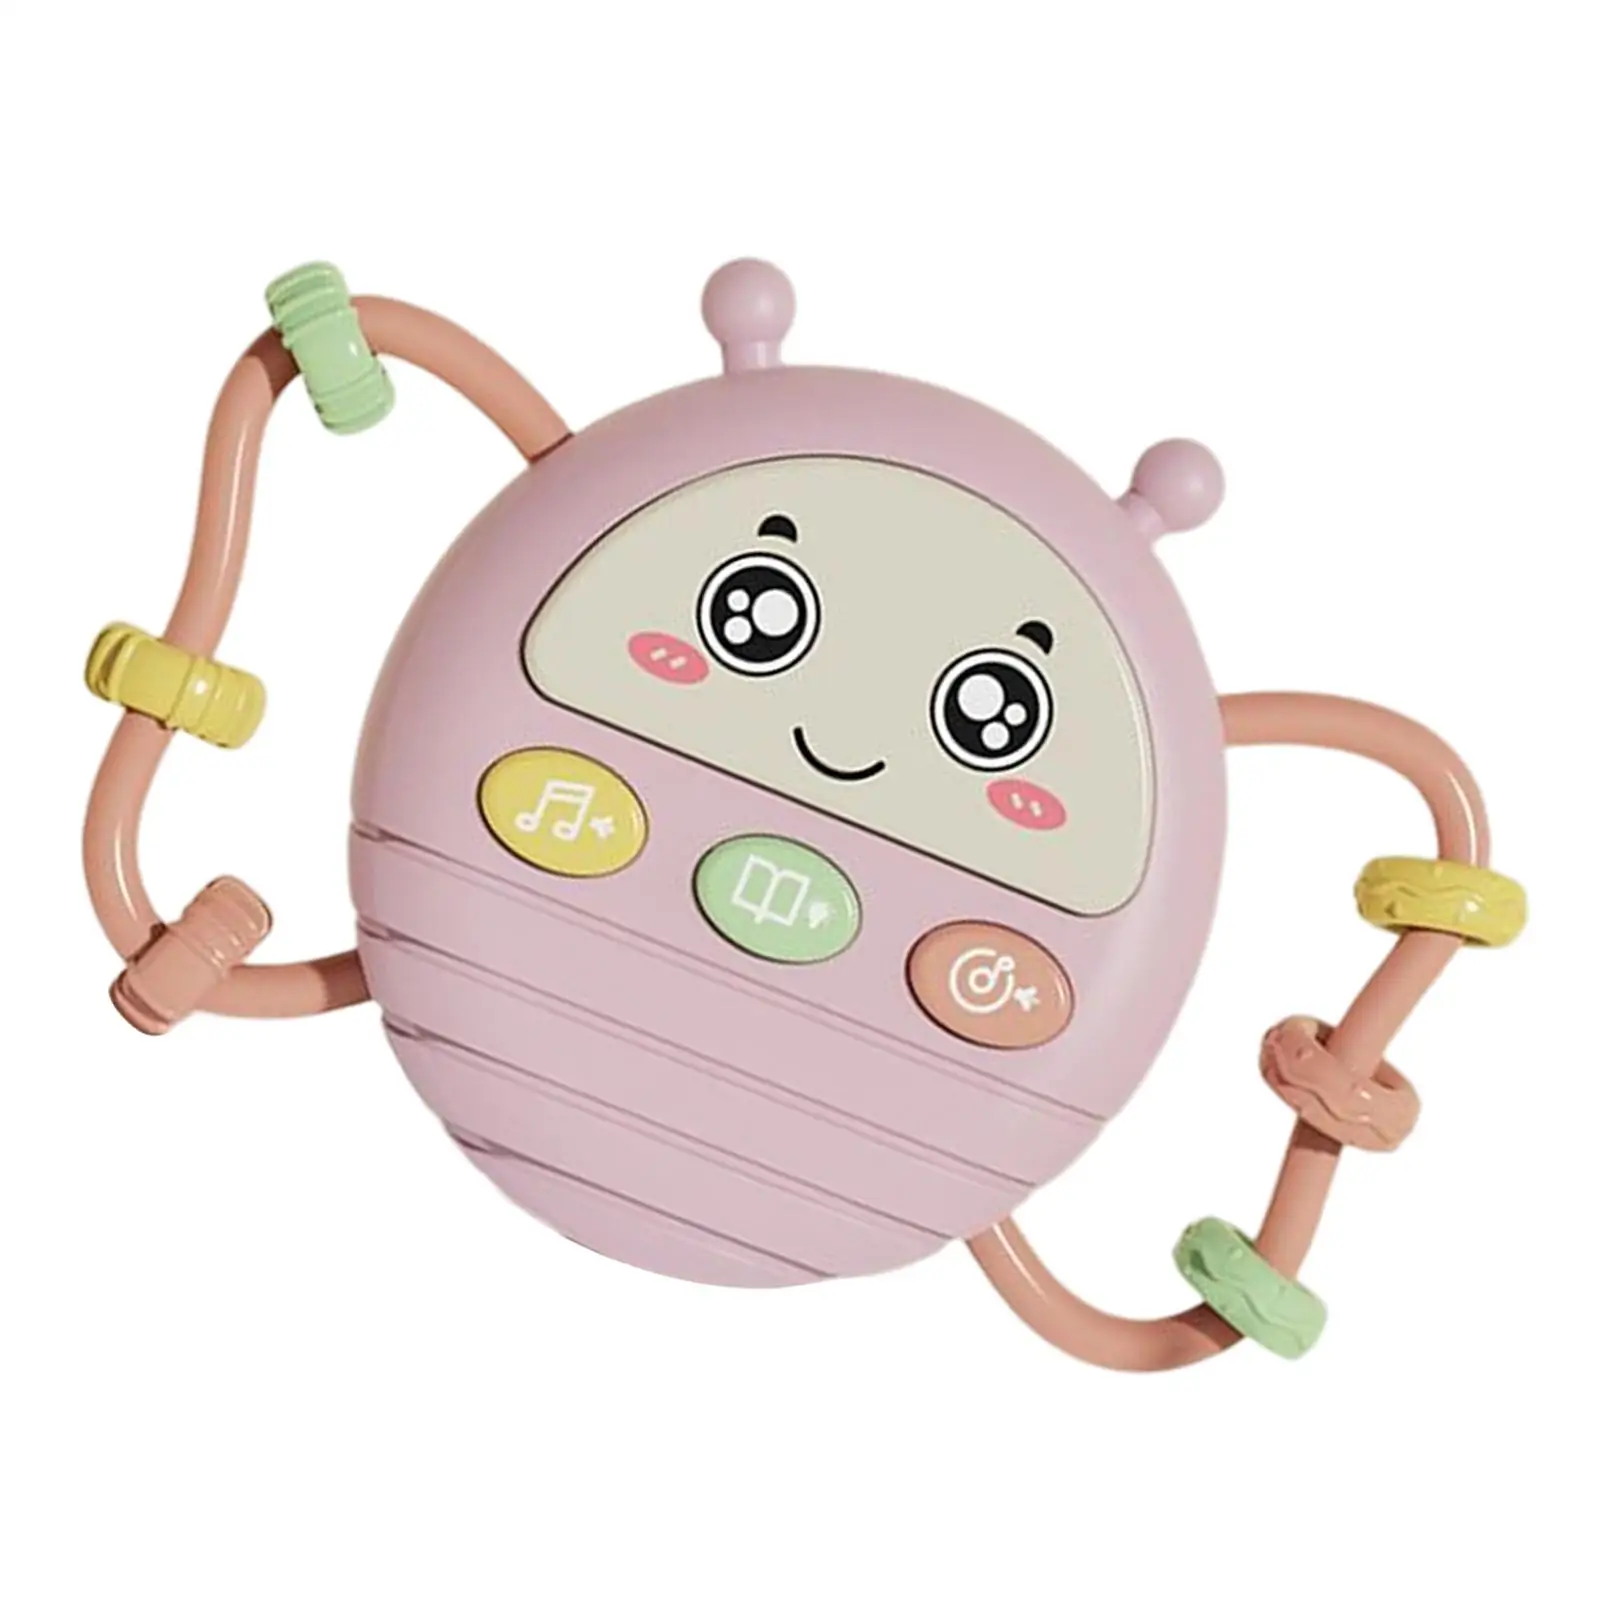 Developmental Musical Toys Multipurpose with Lights Gifts Rattles Toys Adorable Hand Beat Drum Piano Handbell for Infant Toddler